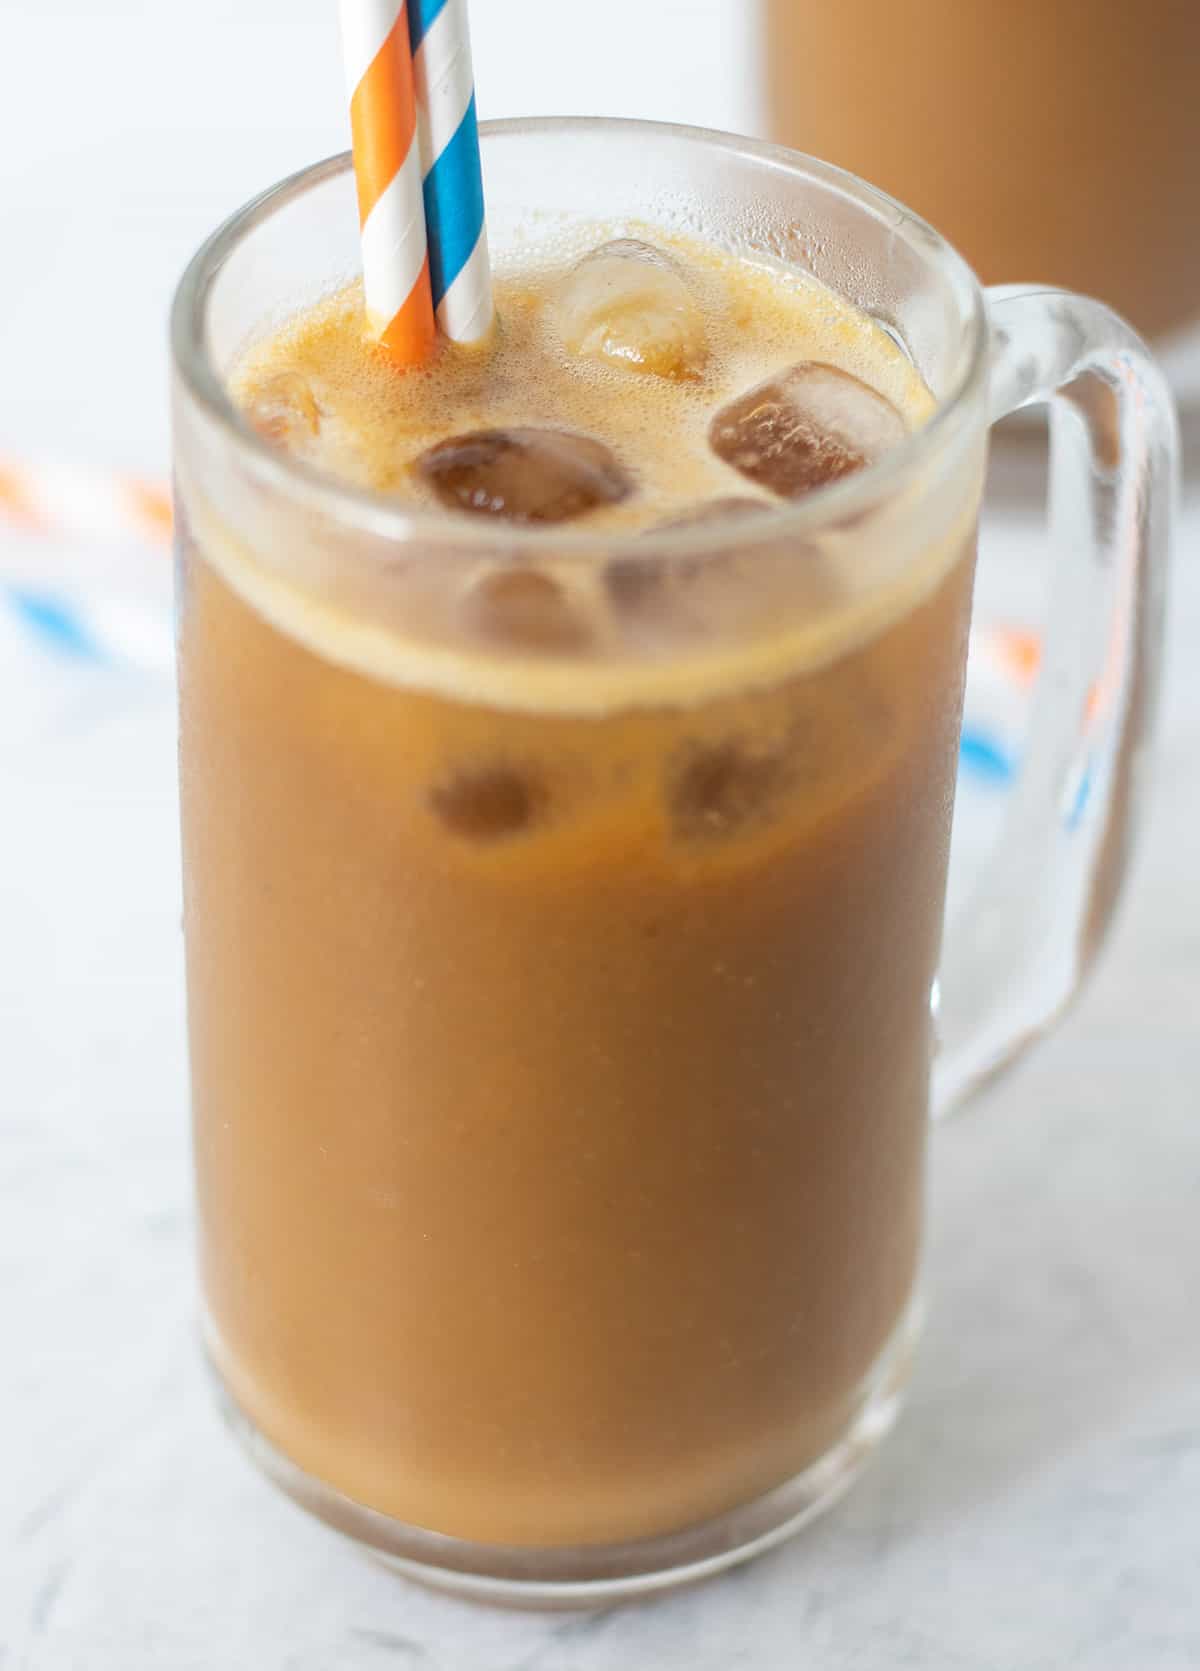 pumpkin coffee smoothie in a clear tall glass with ice. A blue straw and an orange straw in the glass for serving.